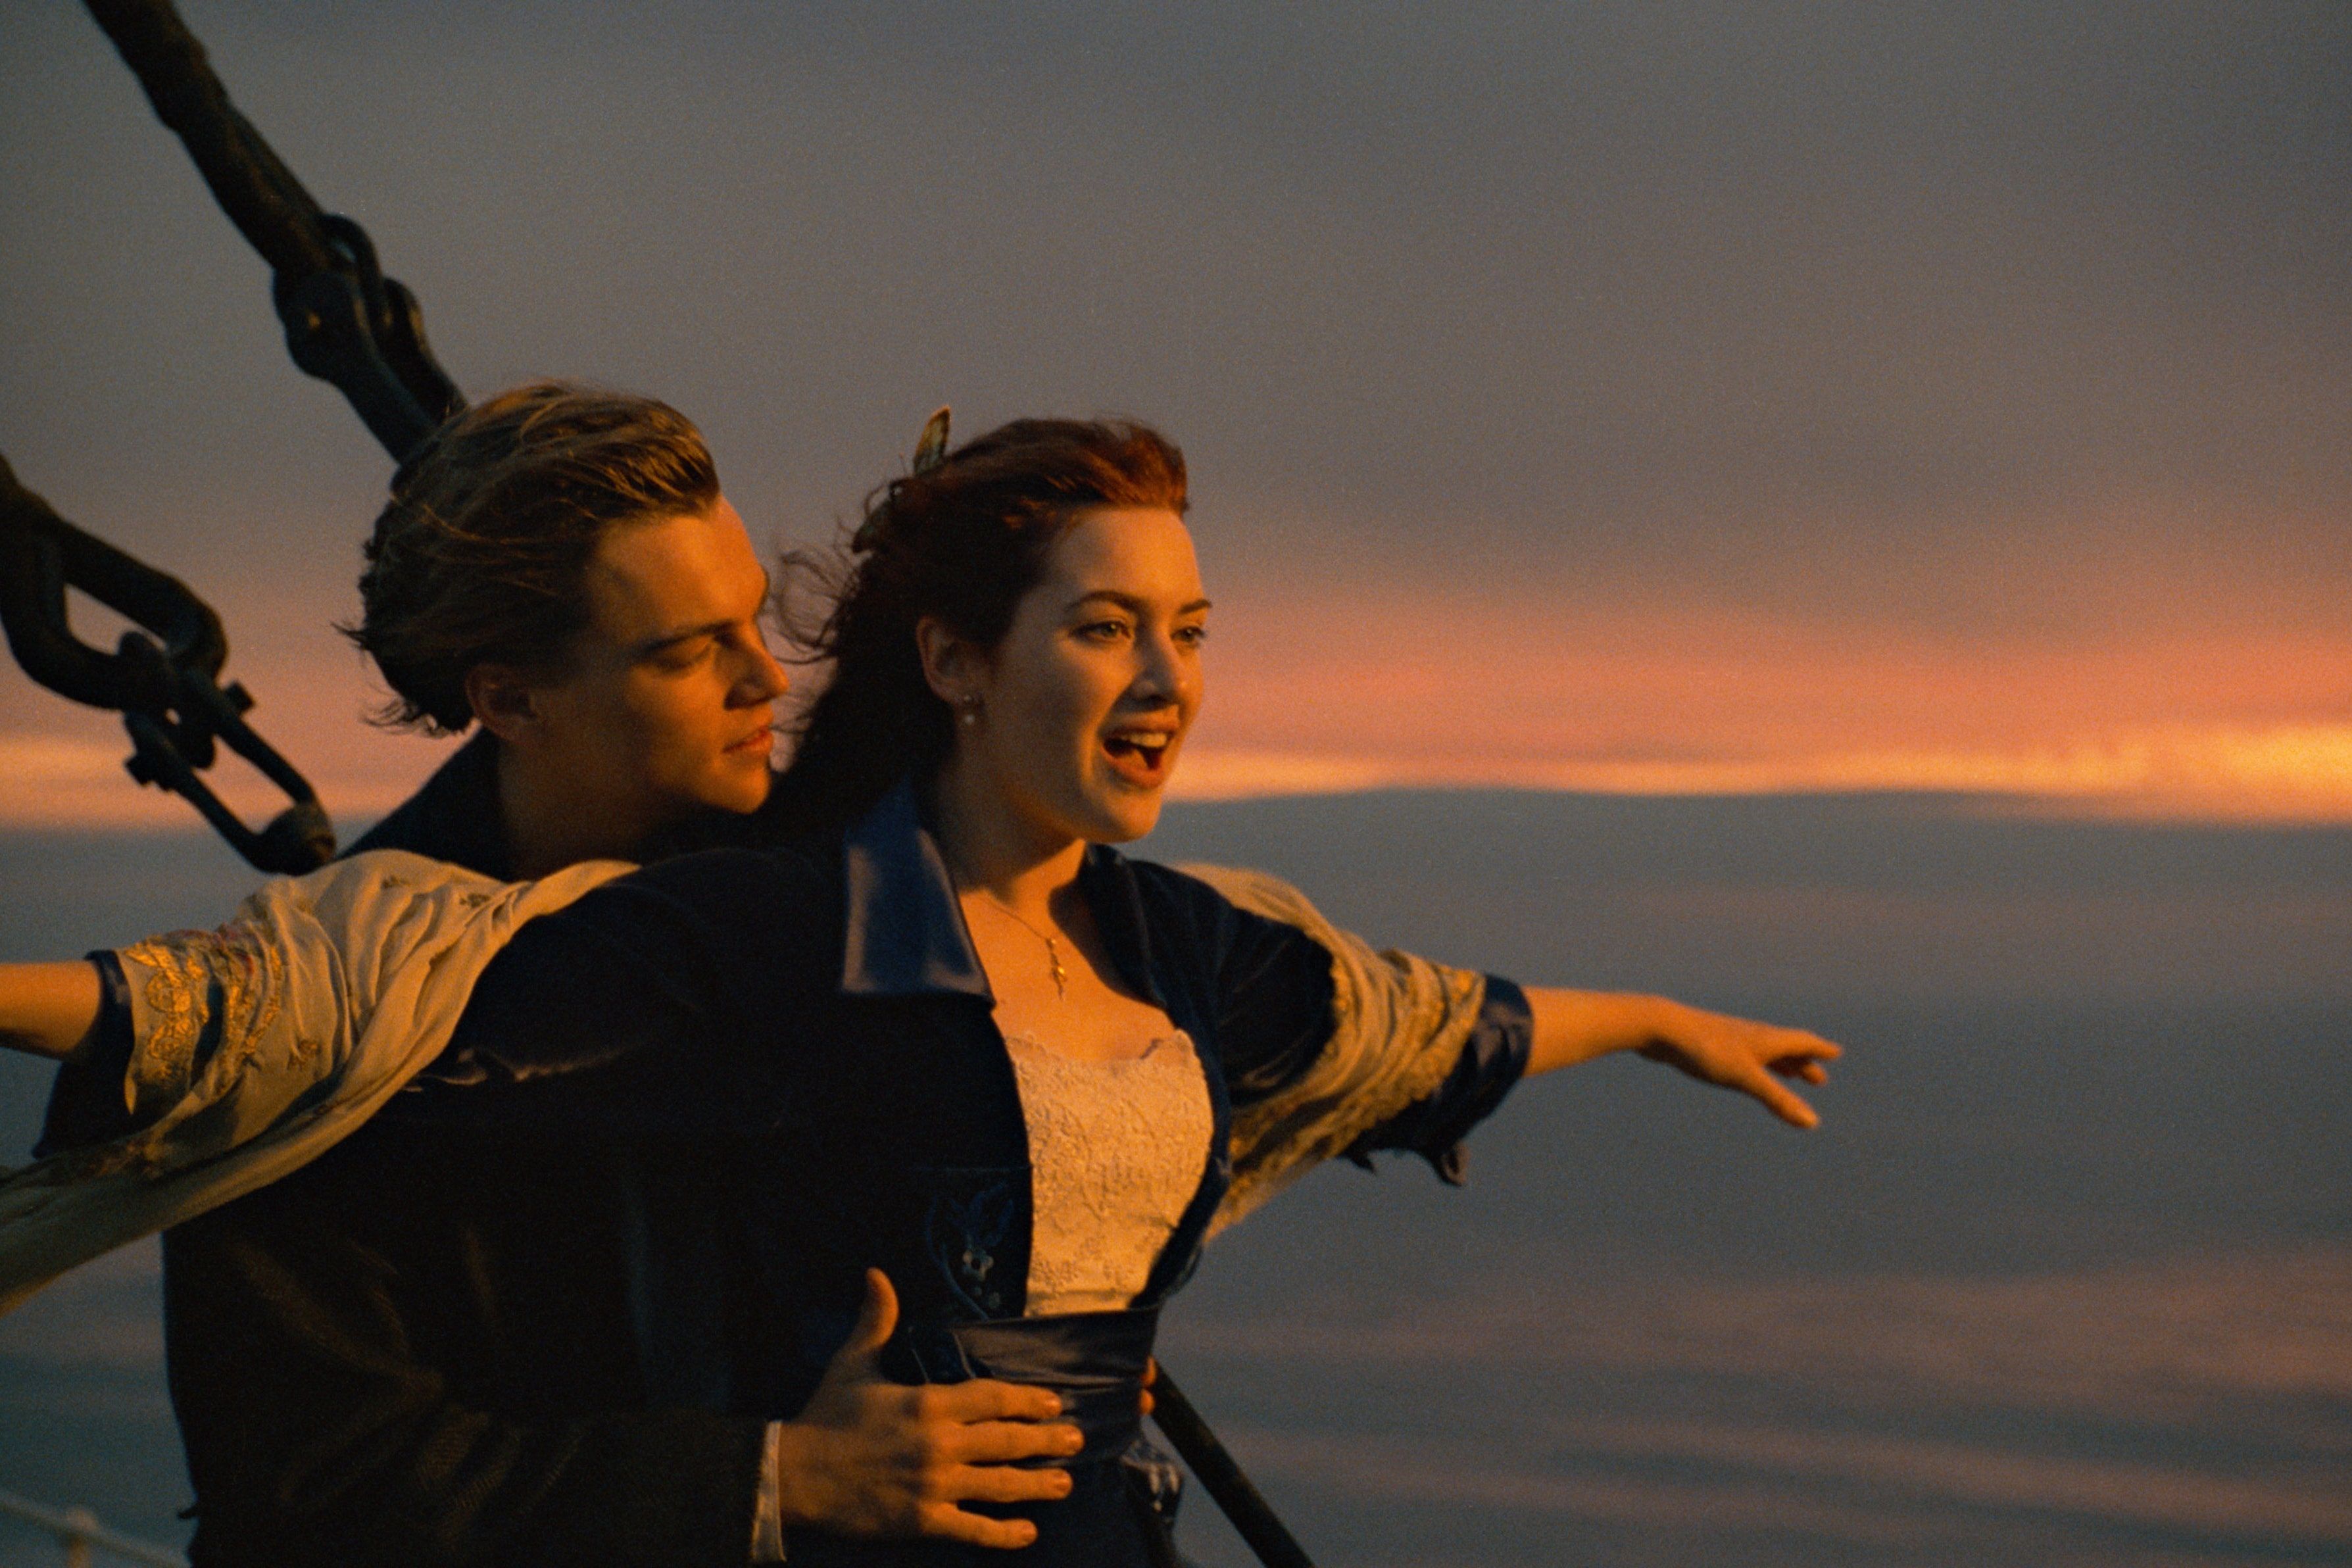 James Cameron on Why Rose Couldn't Share the Door in Titanic